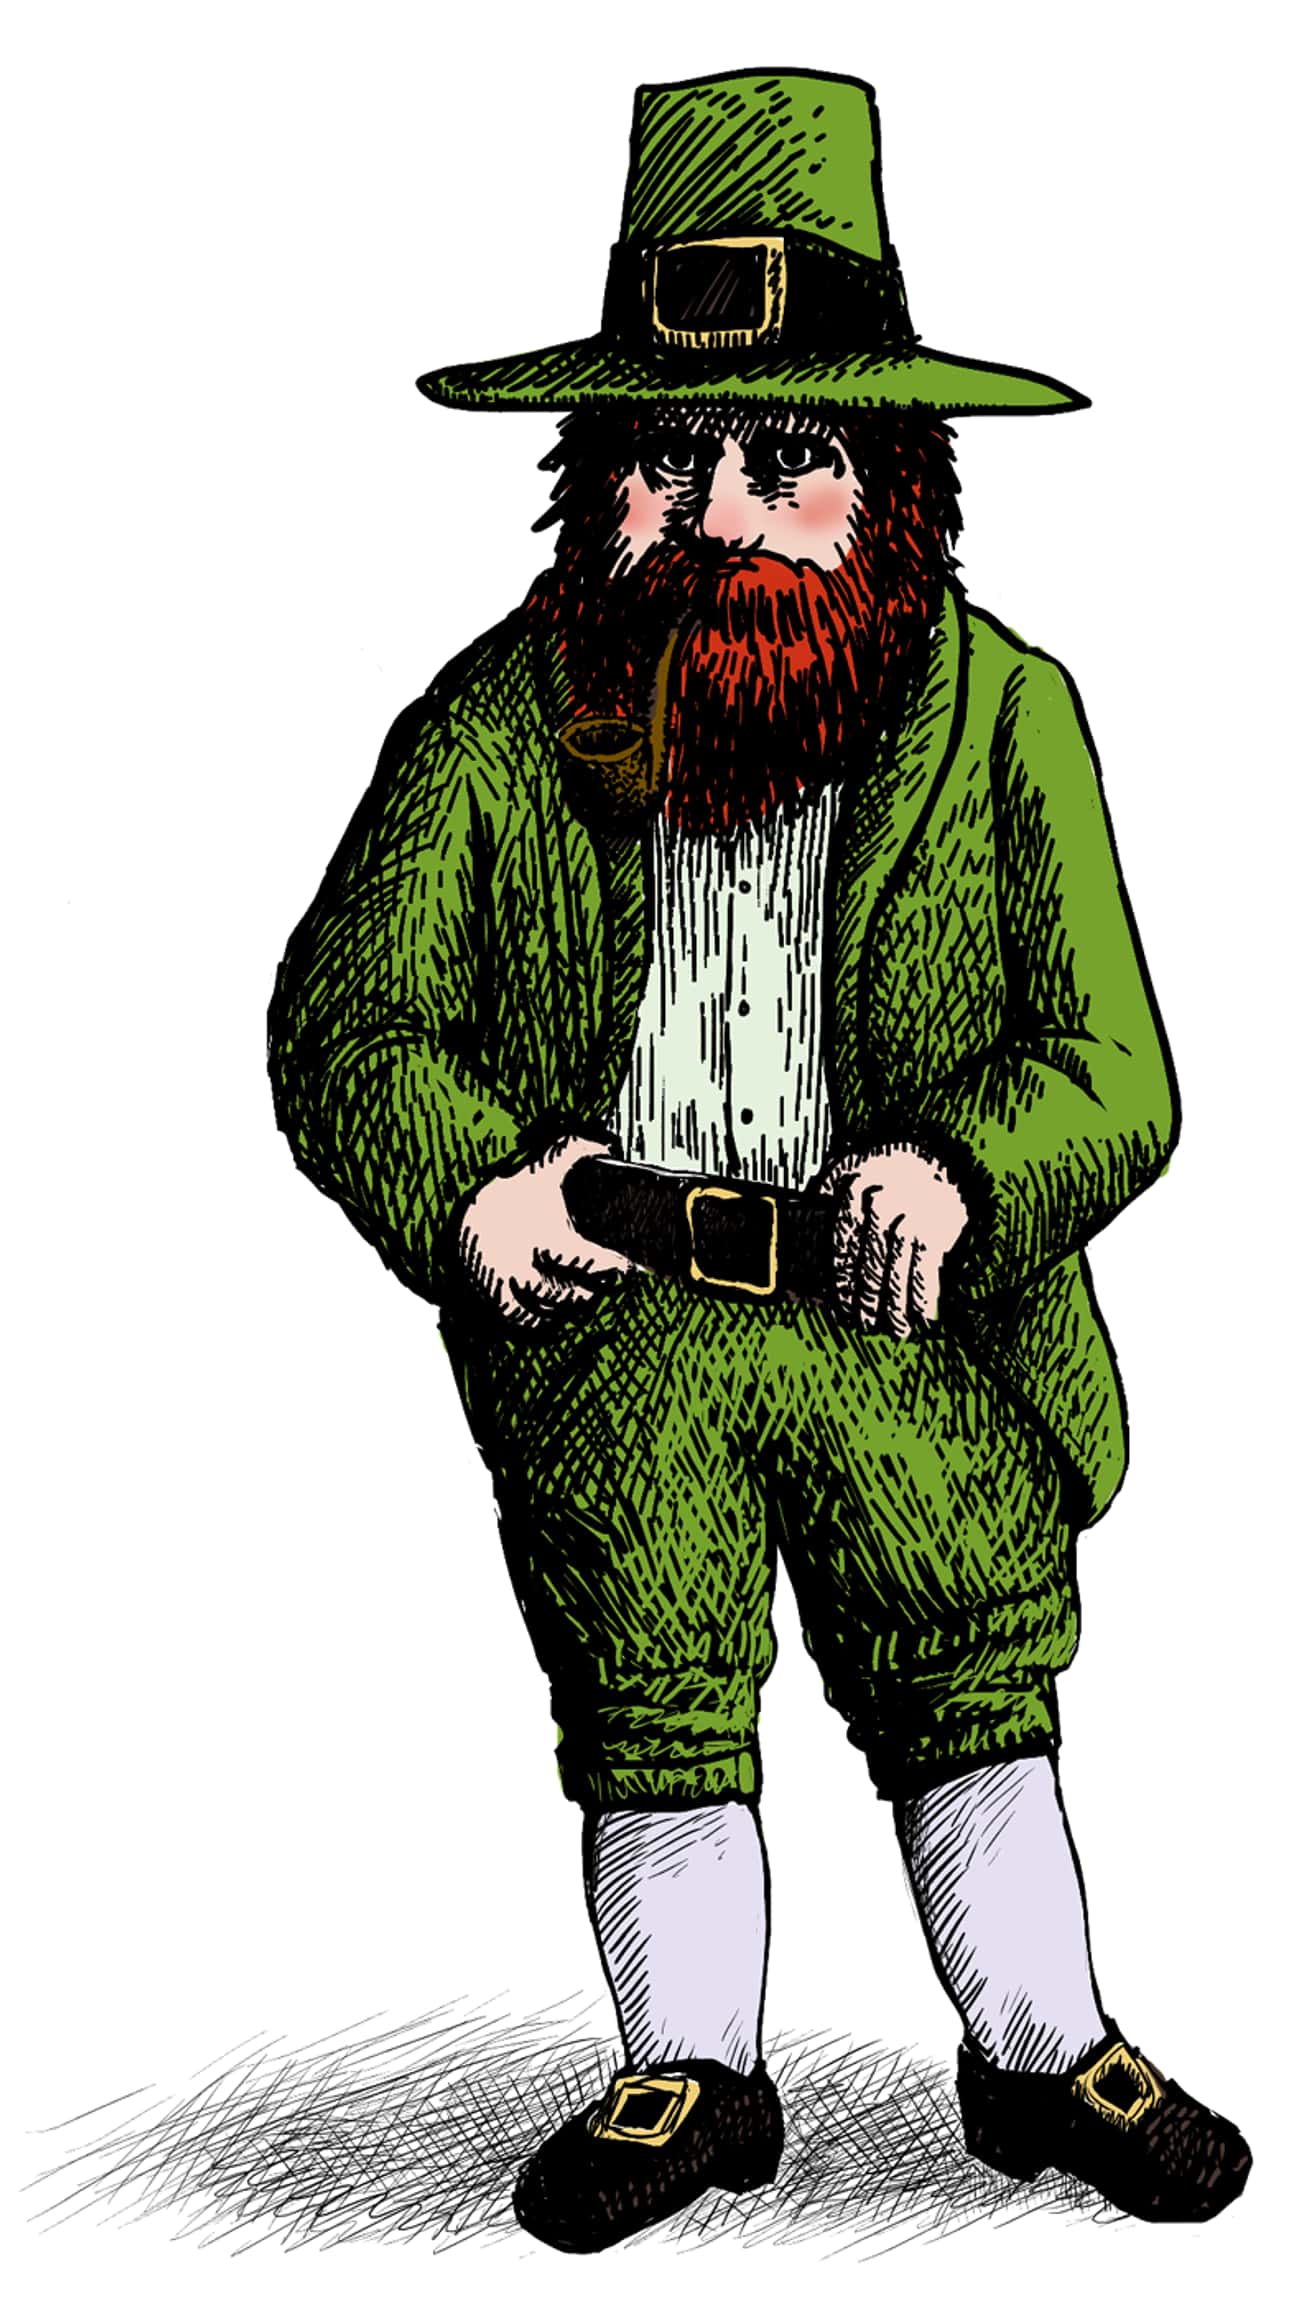 Leprechauns Have Nothing To Do With St. Patrick's Day